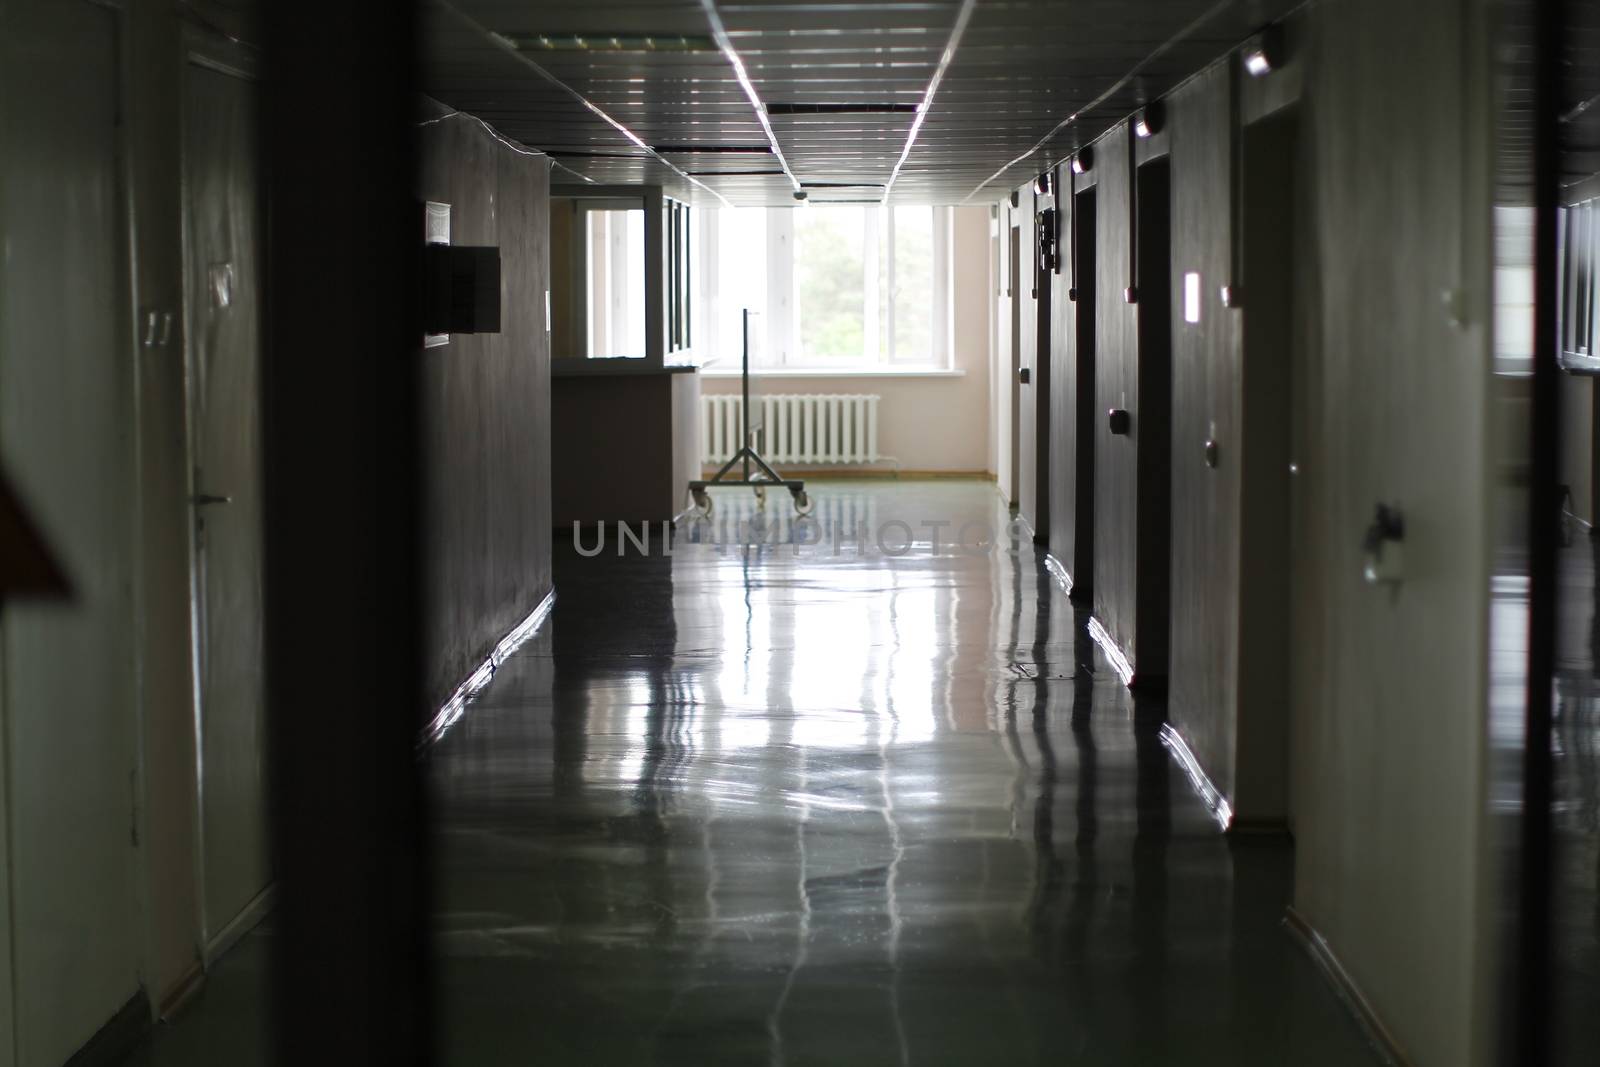 Corridor in the hospital.Rooms for people with lechneia